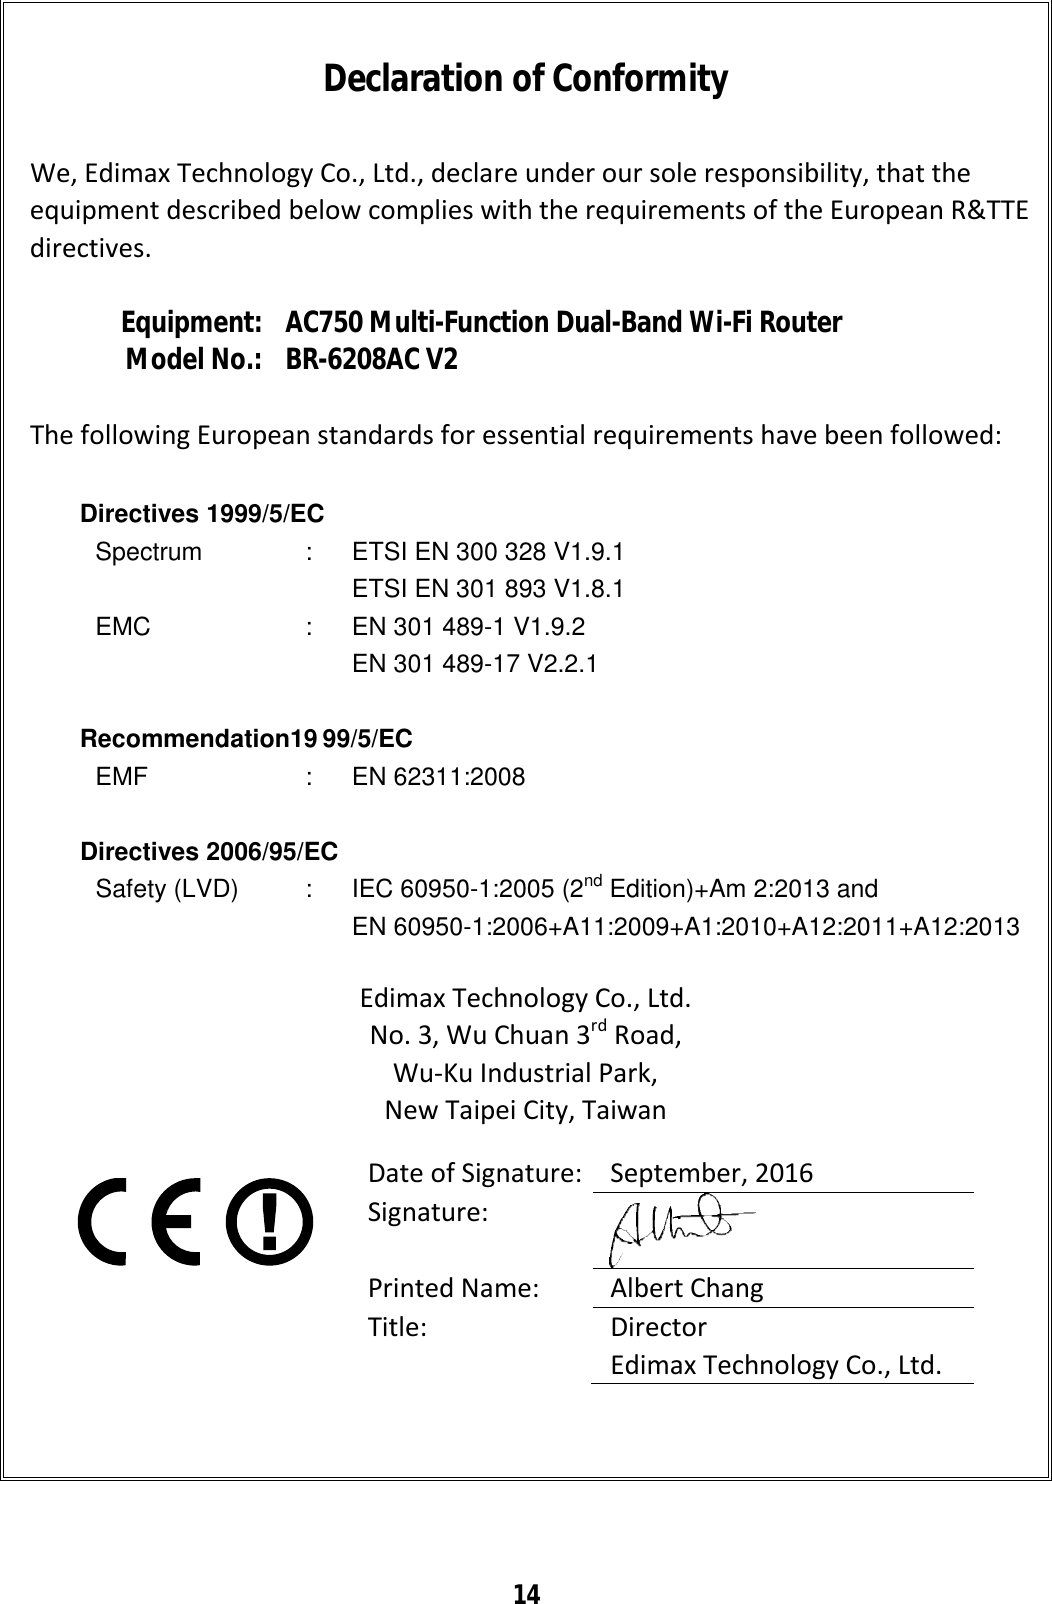 14     Declaration of Conformity  We, Edimax Technology Co., Ltd., declare under our sole responsibility, that the equipment described below complies with the requirements of the European R&amp;TTE directives.  Equipment: AC750 Multi-Function Dual-Band Wi-Fi Router Model No.: BR-6208AC V2  The following European standards for essential requirements have been followed:  Directives 1999/5/EC Spectrum  : ETSI EN 300 328 V1.9.1  ETSI EN 301 893 V1.8.1  EMC  : EN 301 489-1 V1.9.2  EN 301 489-17 V2.2.1   Recommendation19 99/5/EC EMF  : EN 62311:2008  Directives 2006/95/EC  Safety (LVD)  : IEC 60950-1:2005 (2nd Edition)+Am 2:2013 and EN 60950-1:2006+A11:2009+A1:2010+A12:2011+A12:2013  Edimax Technology Co., Ltd. No. 3, Wu Chuan 3rd Road, Wu-Ku Industrial Park, New Taipei City, Taiwan    Date of Signature: September, 2016 Signature:  Printed Name:  Albert Chang Title:  Director Edimax Technology Co., Ltd.  